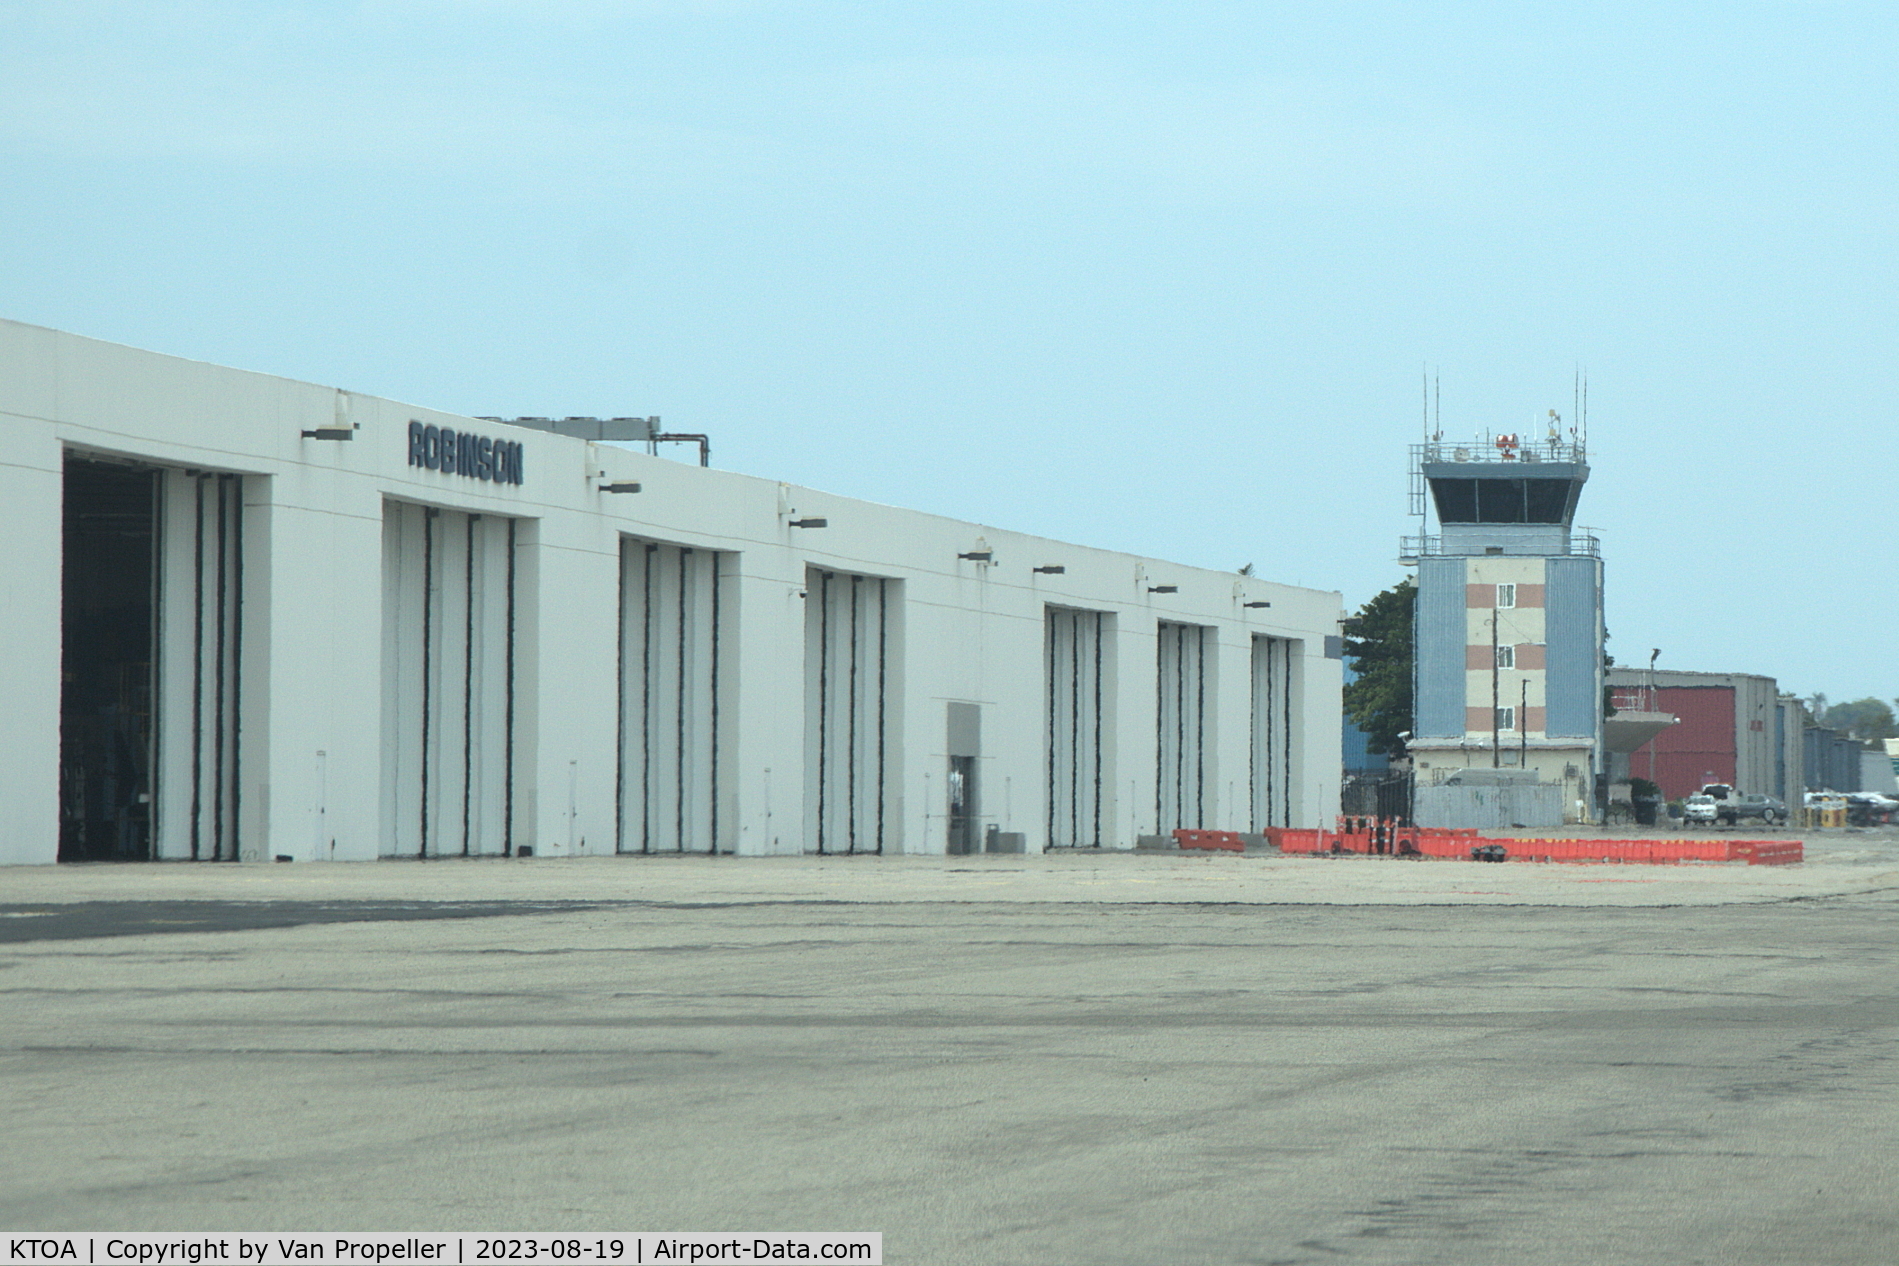 Zamperini Field Airport (TOA) - Torrance Zamperini Field: Robinson Helicopters (left) and control tower